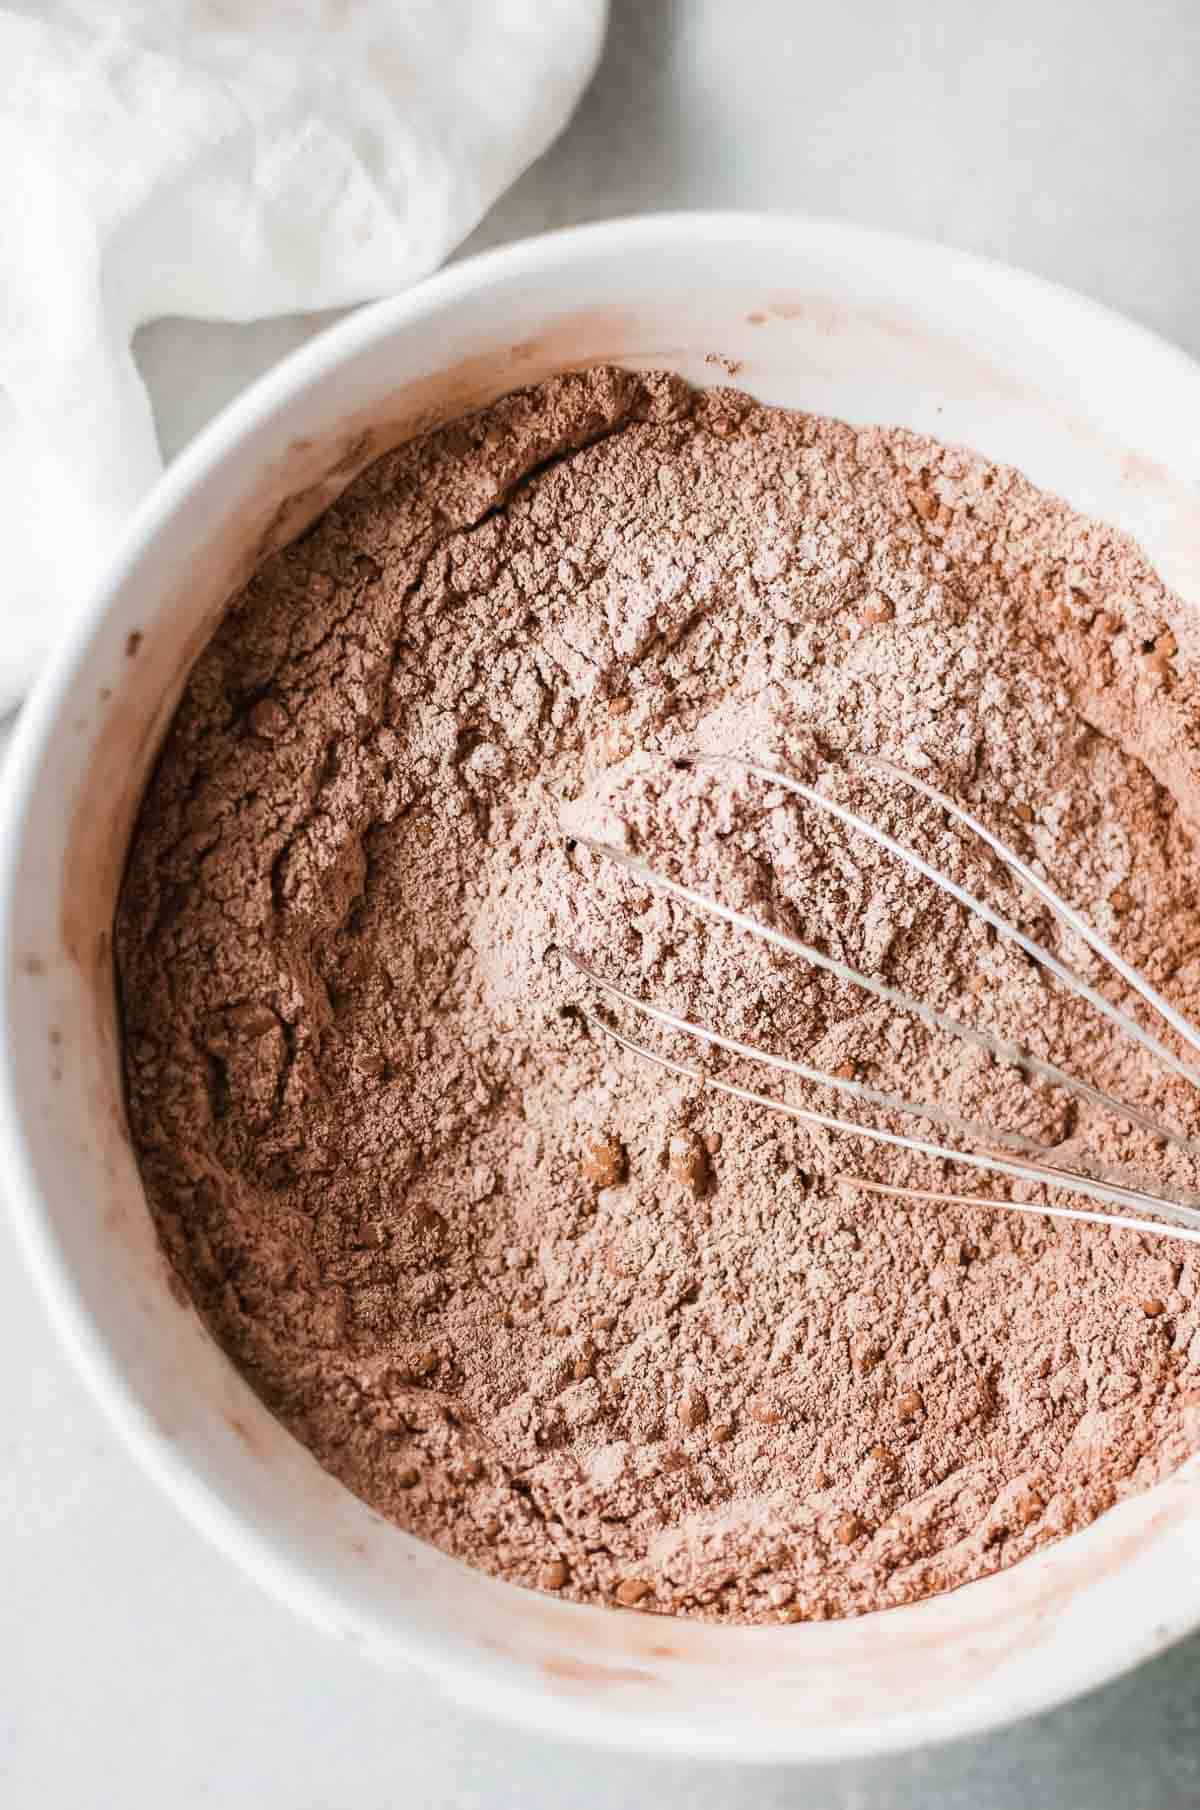 dry chocolate pancake ingredients in white bowl with whisk